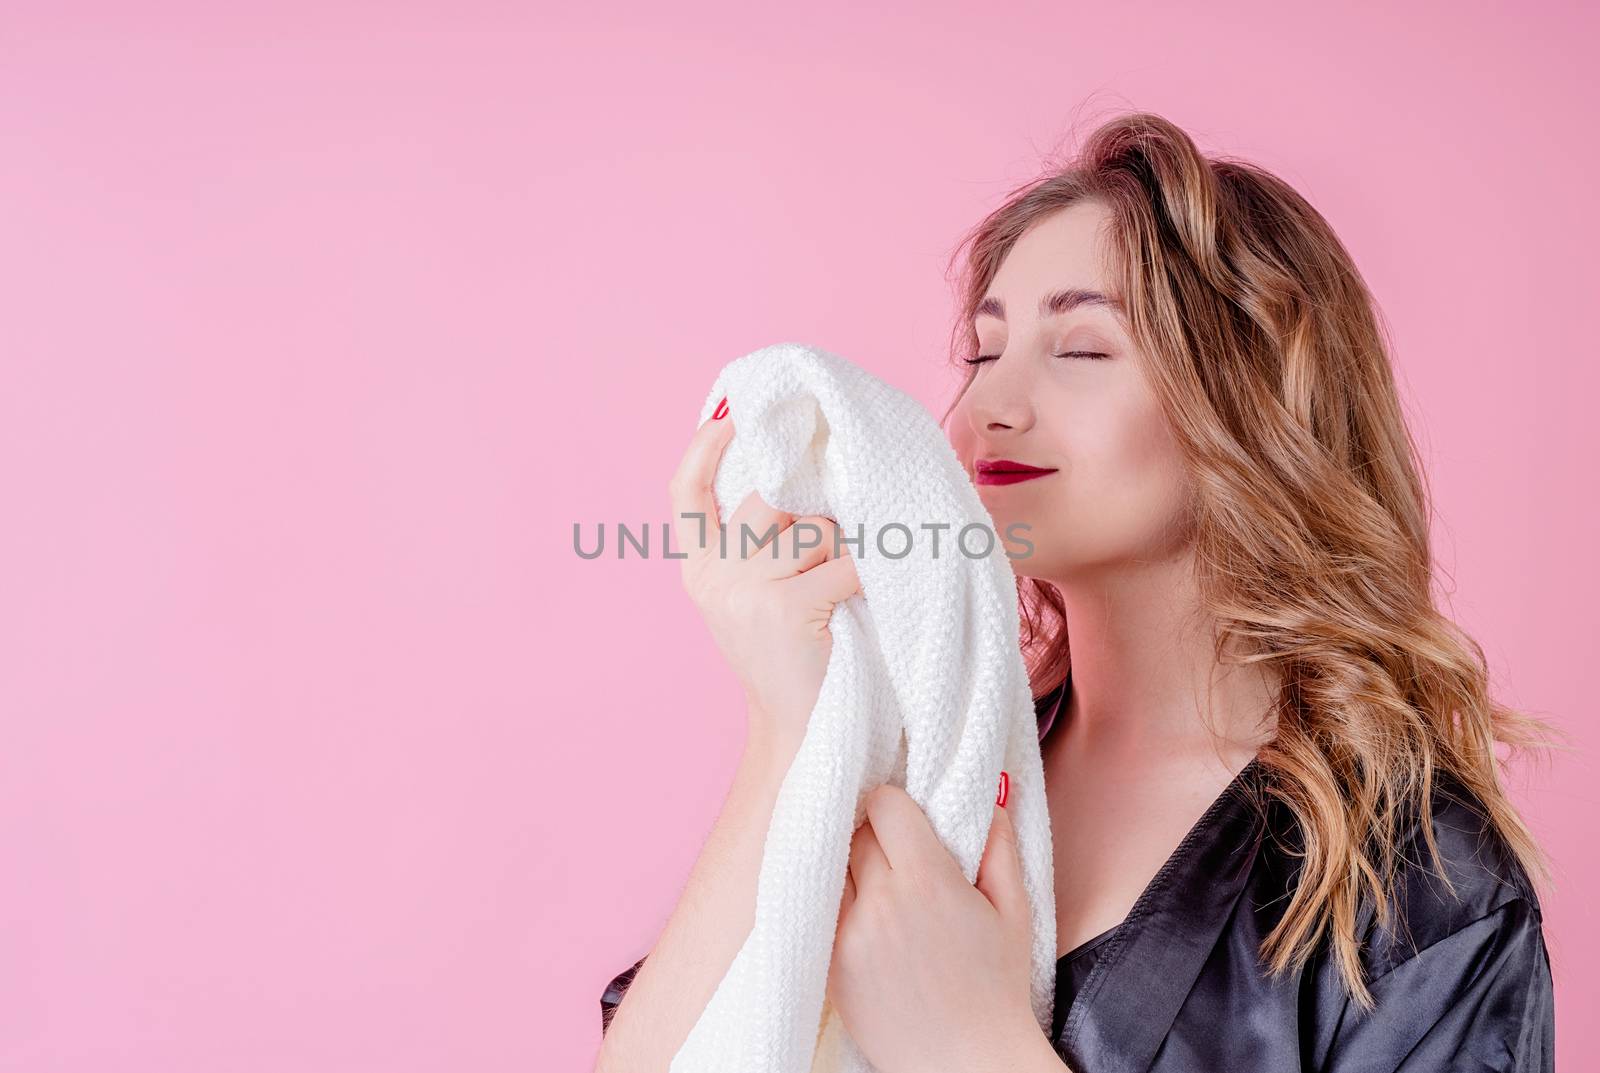 Laundry concept. Beautiful woman smelling clean clothes isolated on pink background with copy space